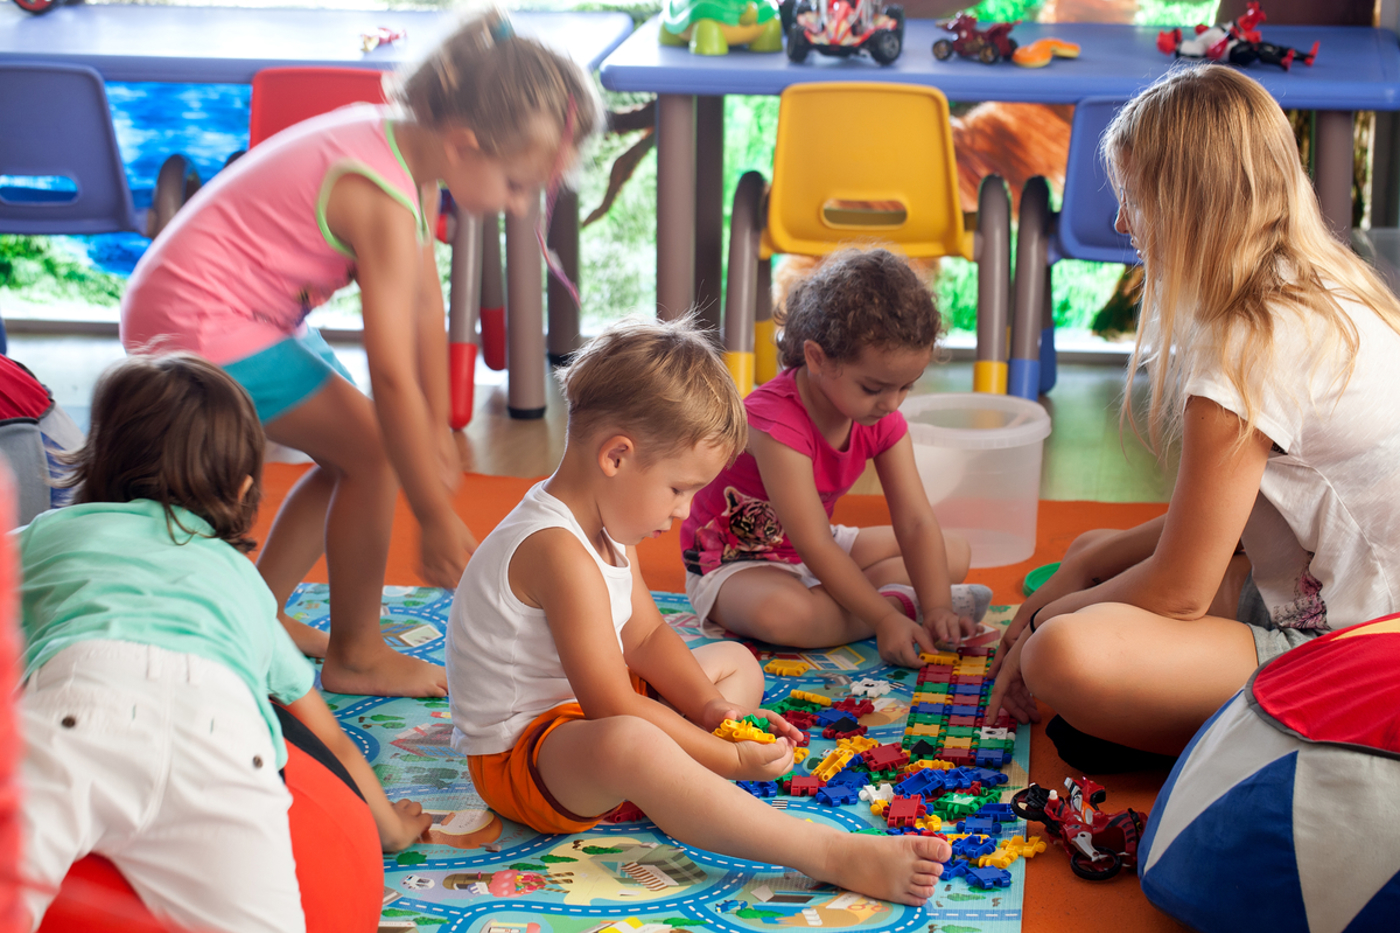 Group of young children playing with toys sitting with an adult woman 